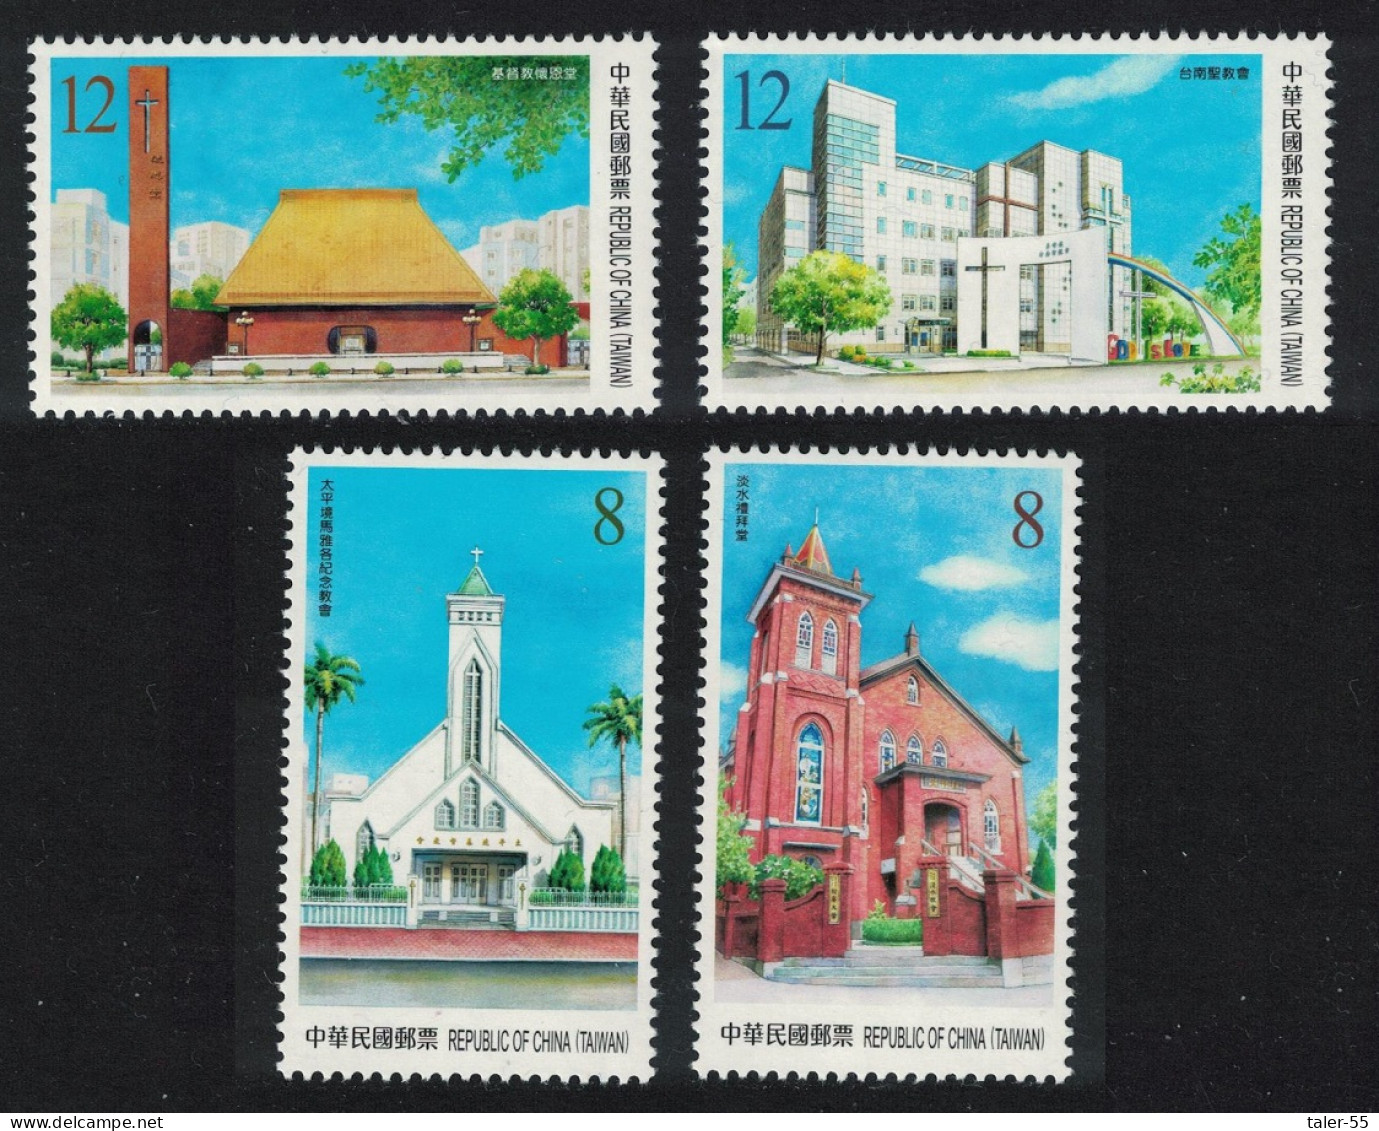 Taiwan Churches 2019 MNH - Unused Stamps